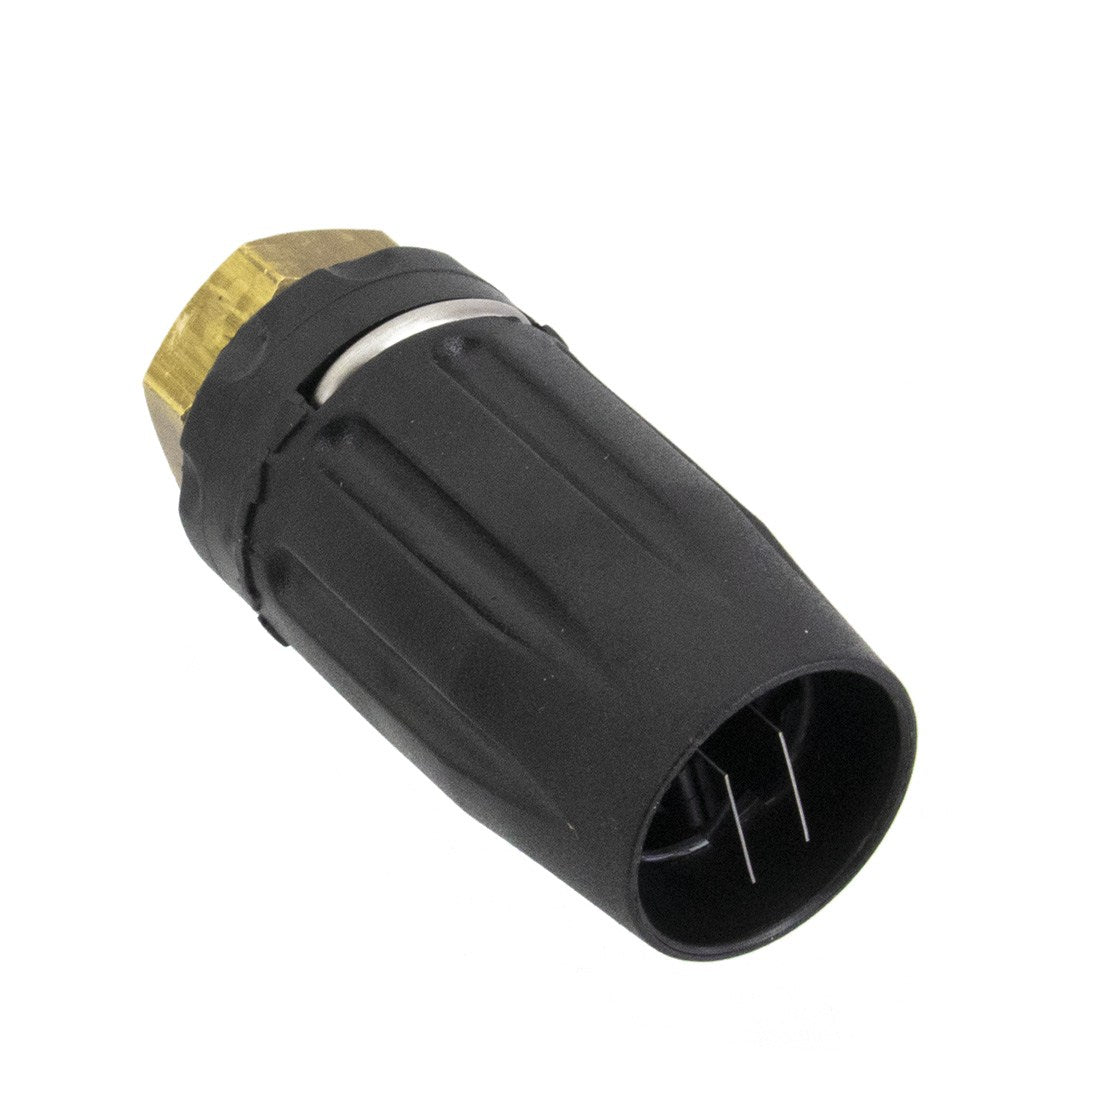 X-Jet M5 Replacement Variable Nozzle - Top View